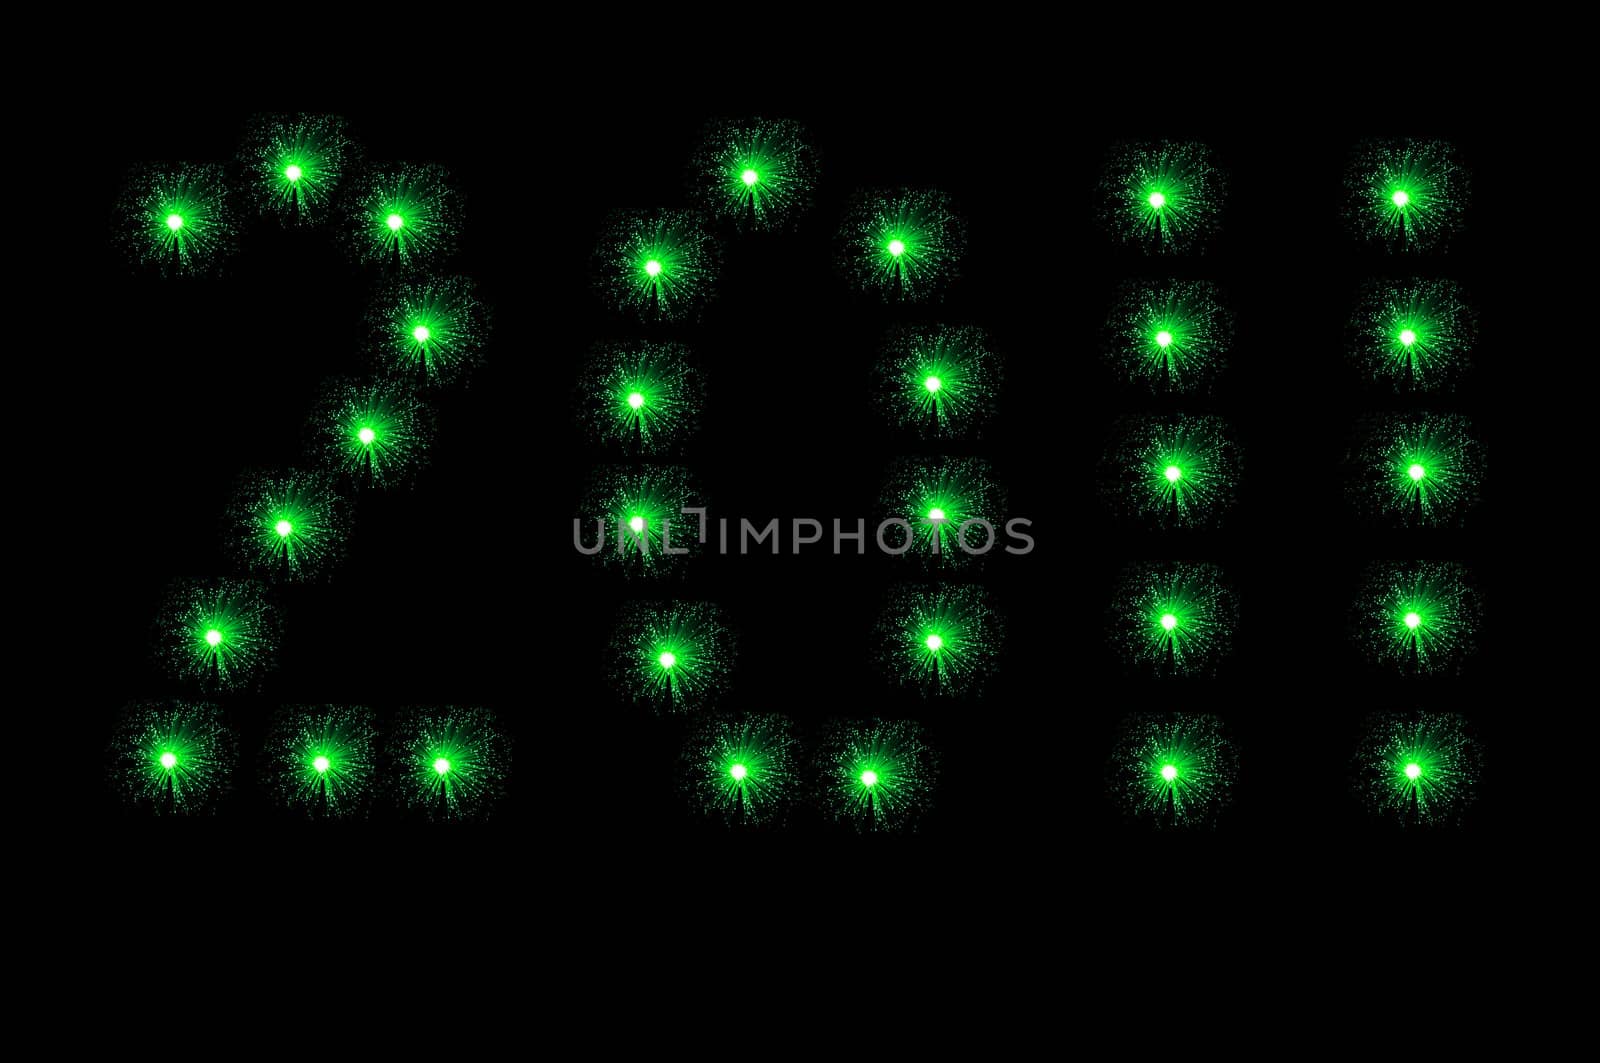 Many small green illuminated fibre optic lamps arranged over white to spell the number 2011